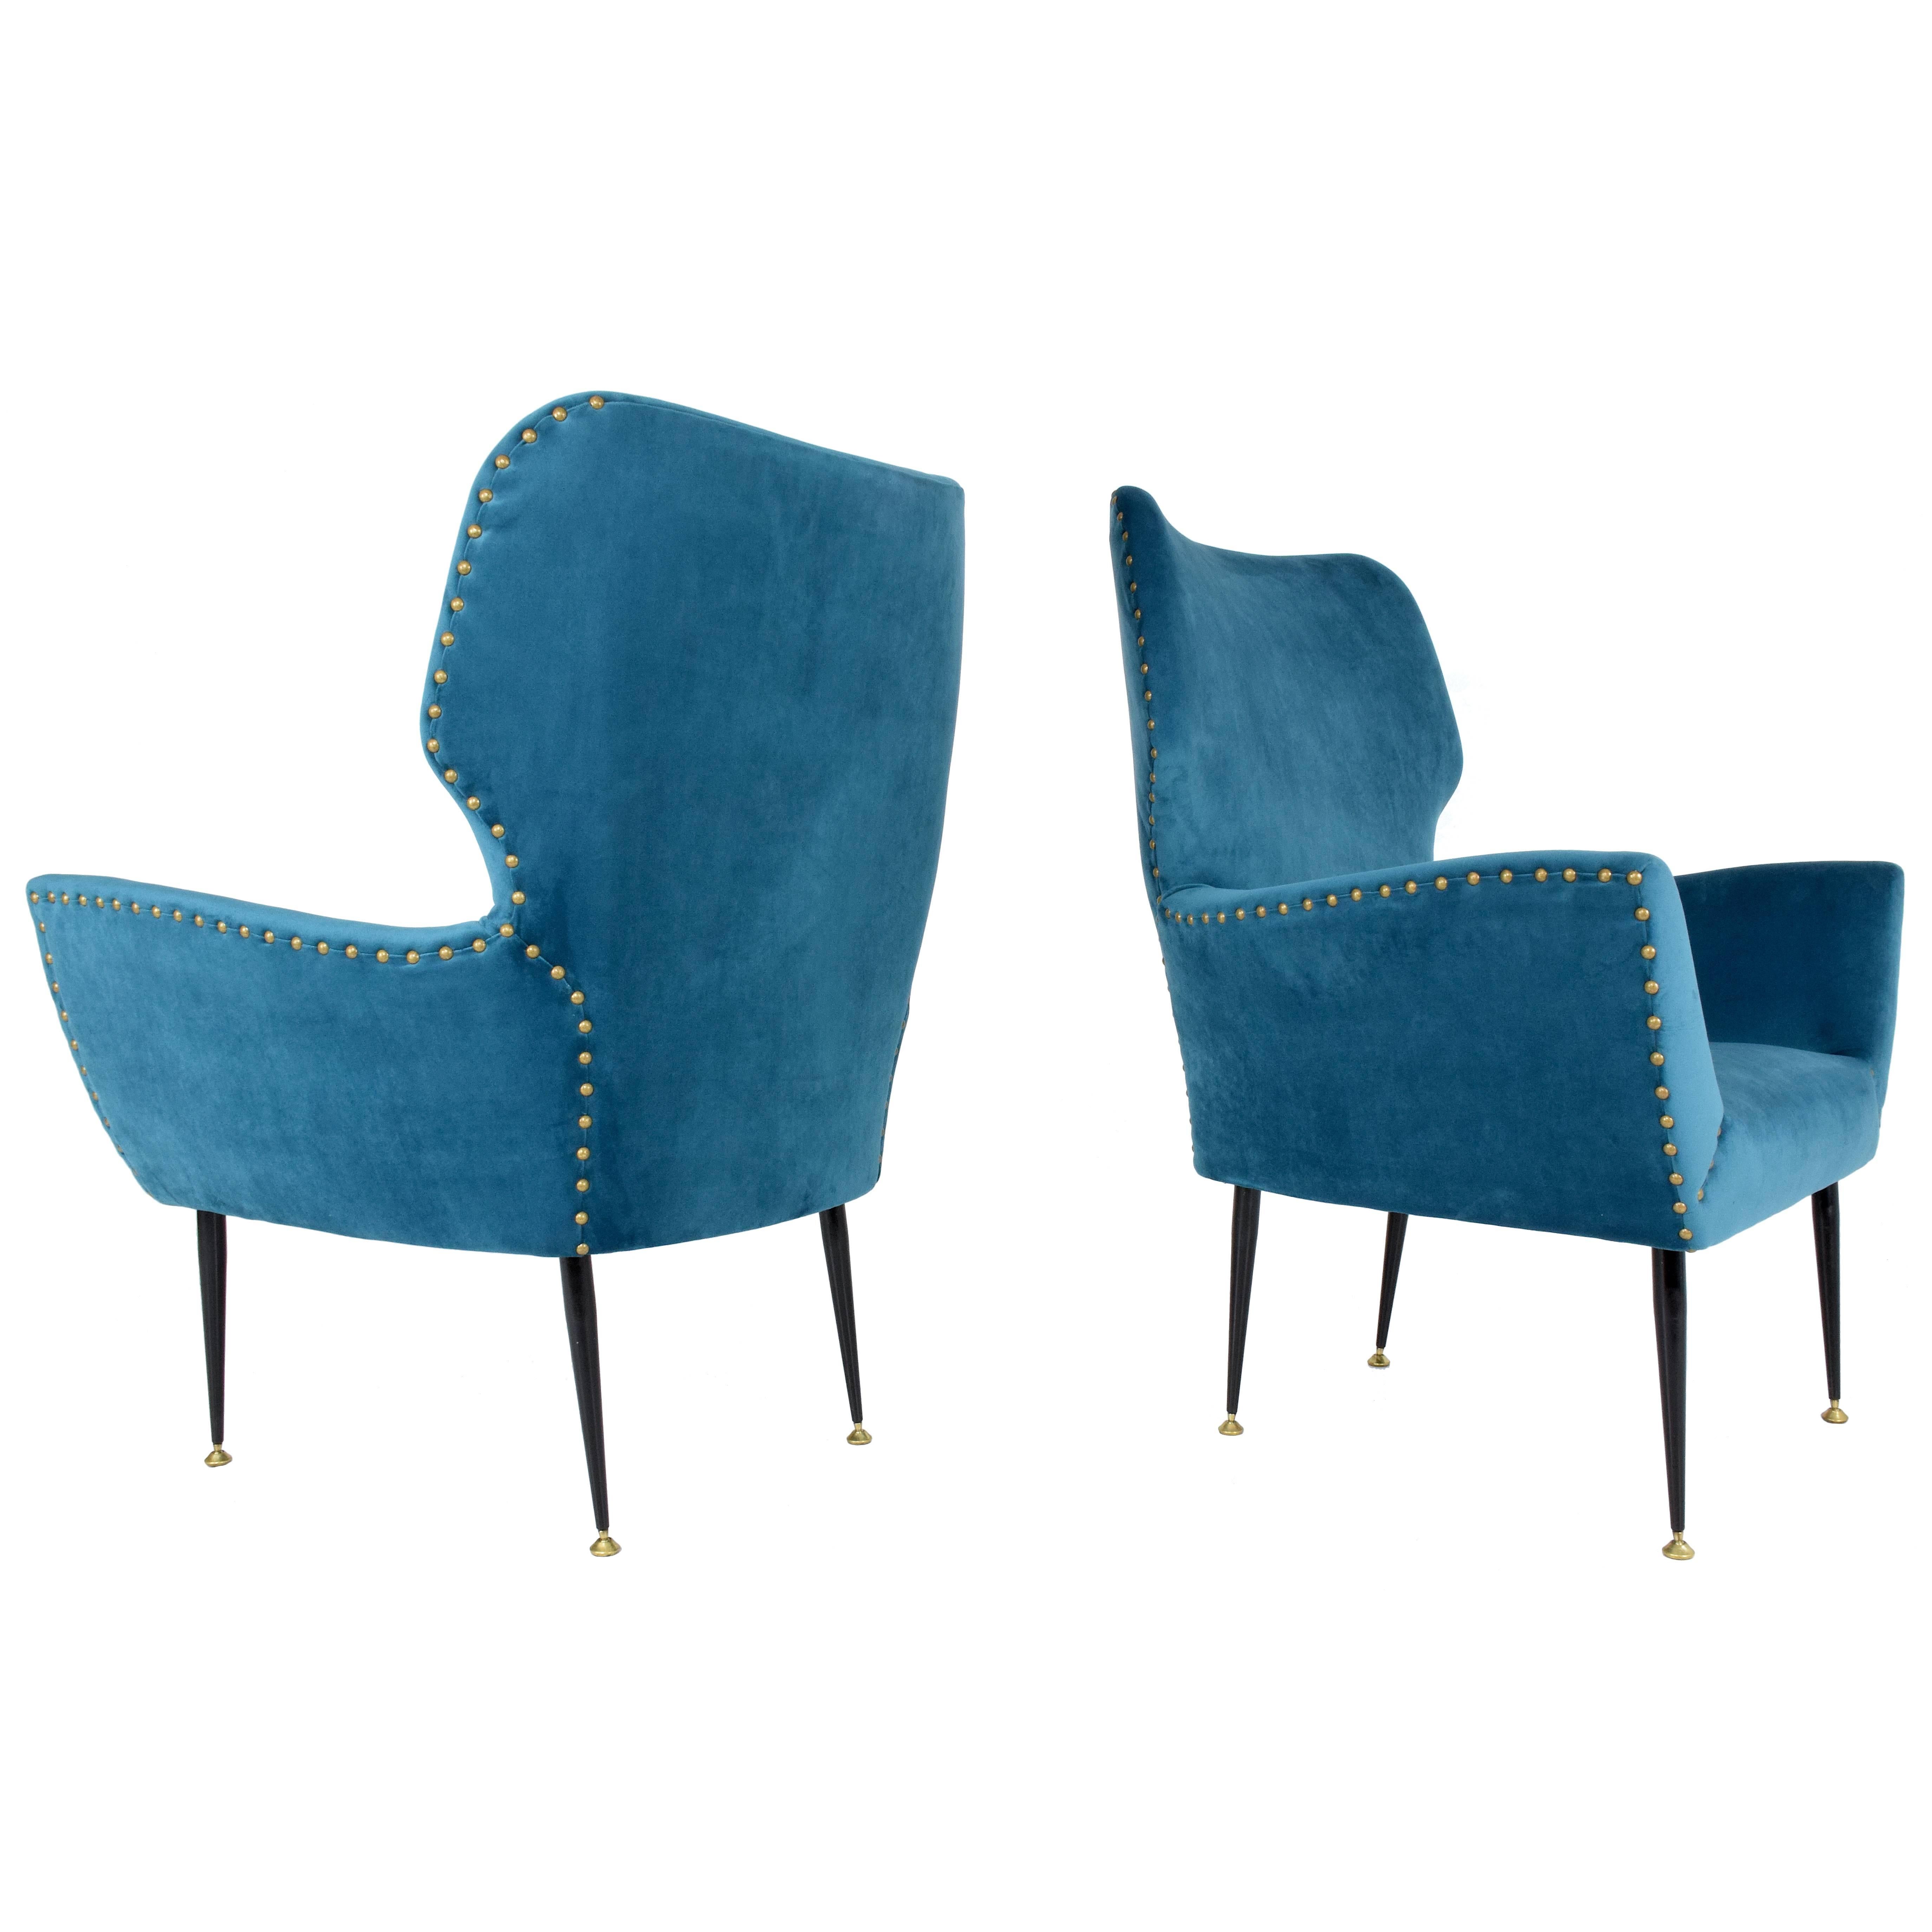 Pair of 20th century vintage Italian armchairs with a curved silhouette frame and tapered steel legs with polished brass endings. We have restored the chairs with blue velvet upholstery, new padding and nailhead trim.

This staple style of Italy's,